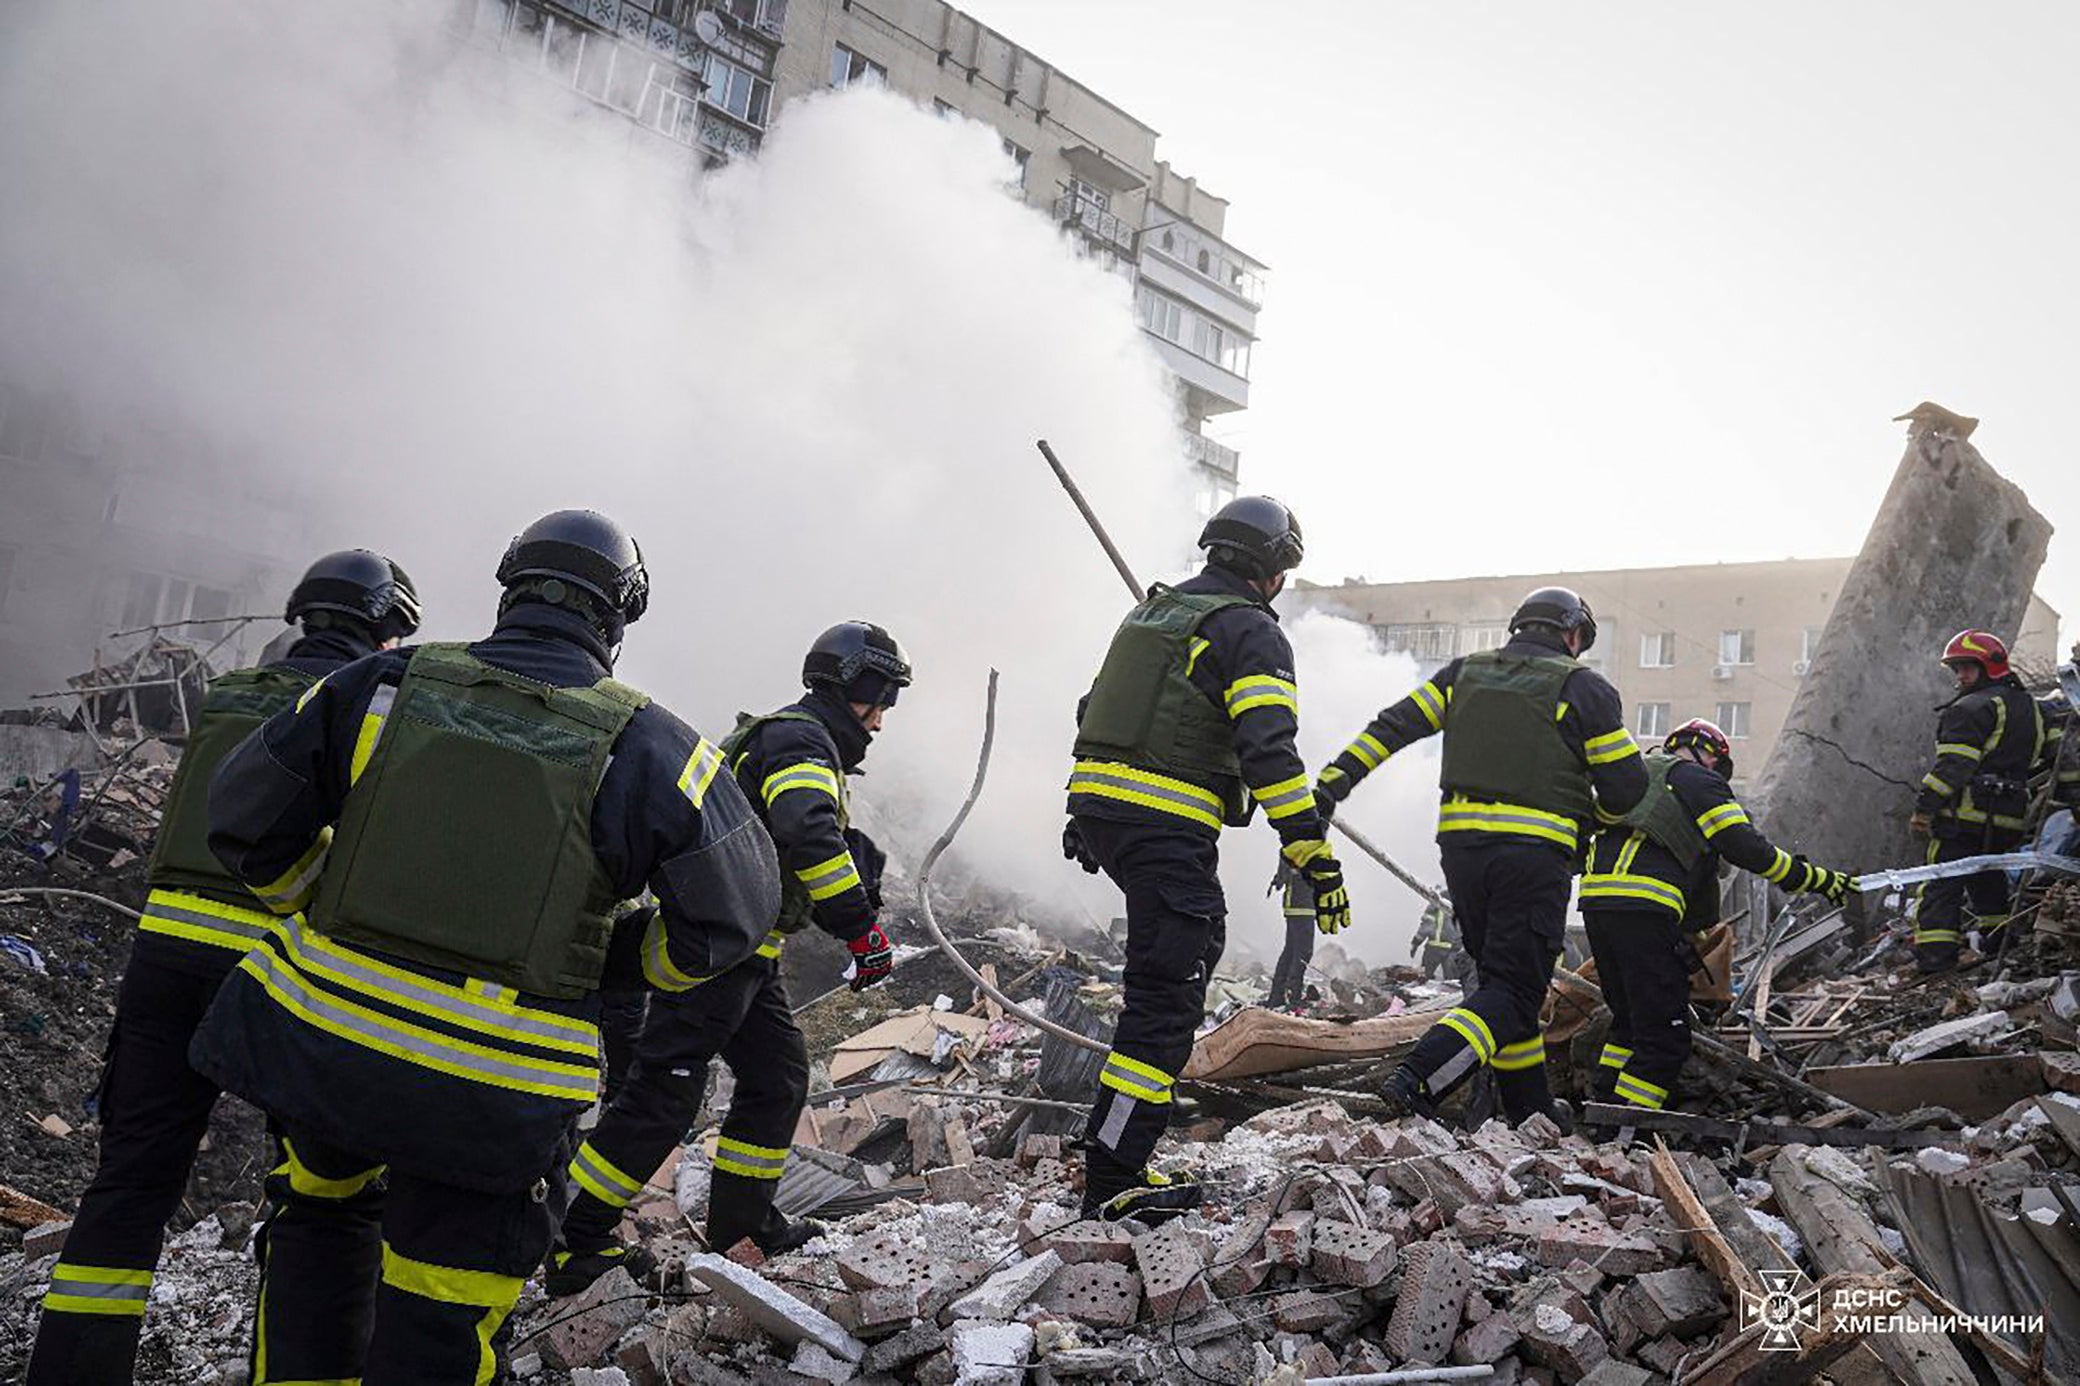 A handout photo made available by the State Emergency Service shows rescuers at work at the scene of a missile strike in the city of Khmelnytskyi, Ukraine